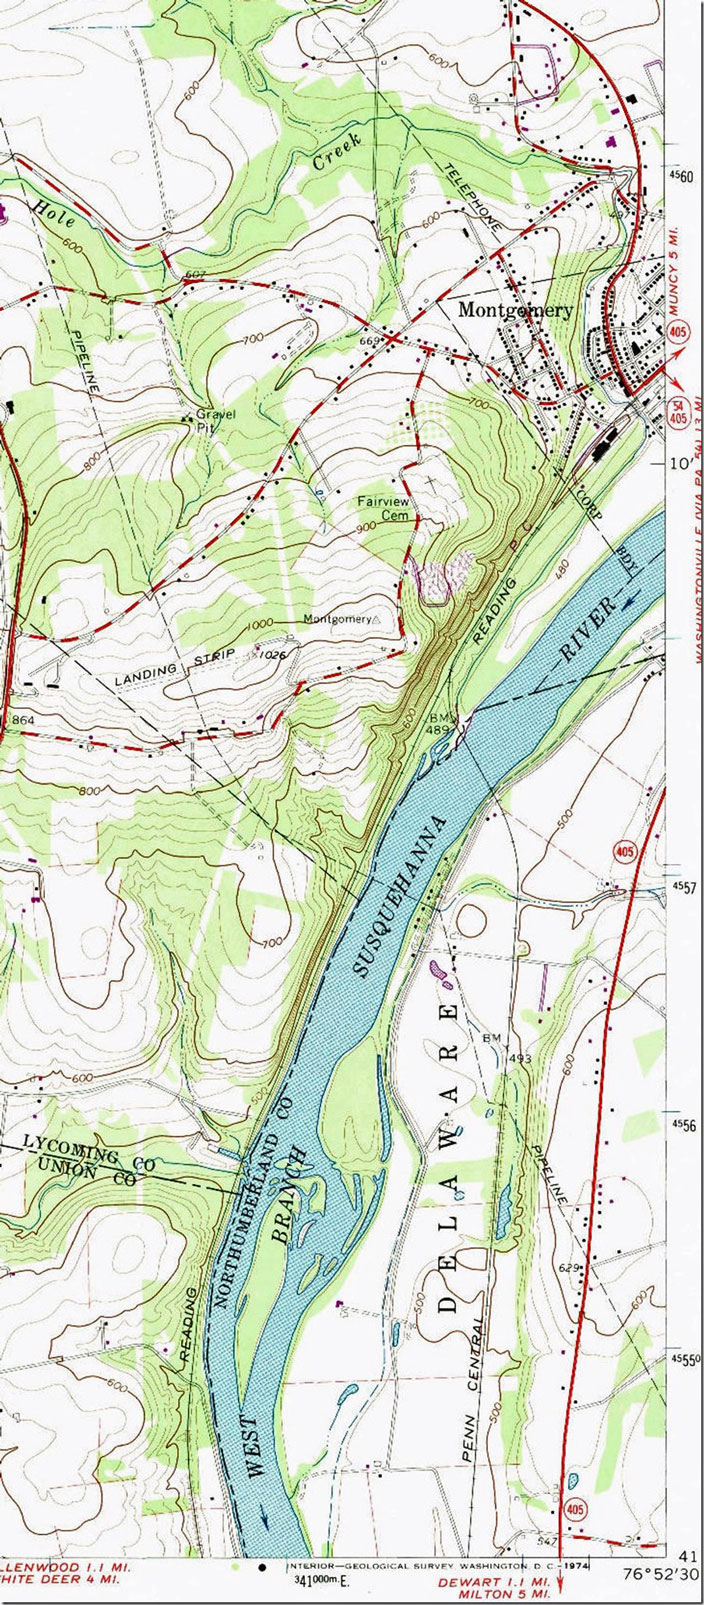 No trace of the Reading now in Montgomery. The Reading crossed the PRR just south of town at their Montgomery Tower, aka OG Tower. Pennsy called it Montgomery Crossing. Montoursville South, PA, 1:24,000 quad, 1965, USGS.